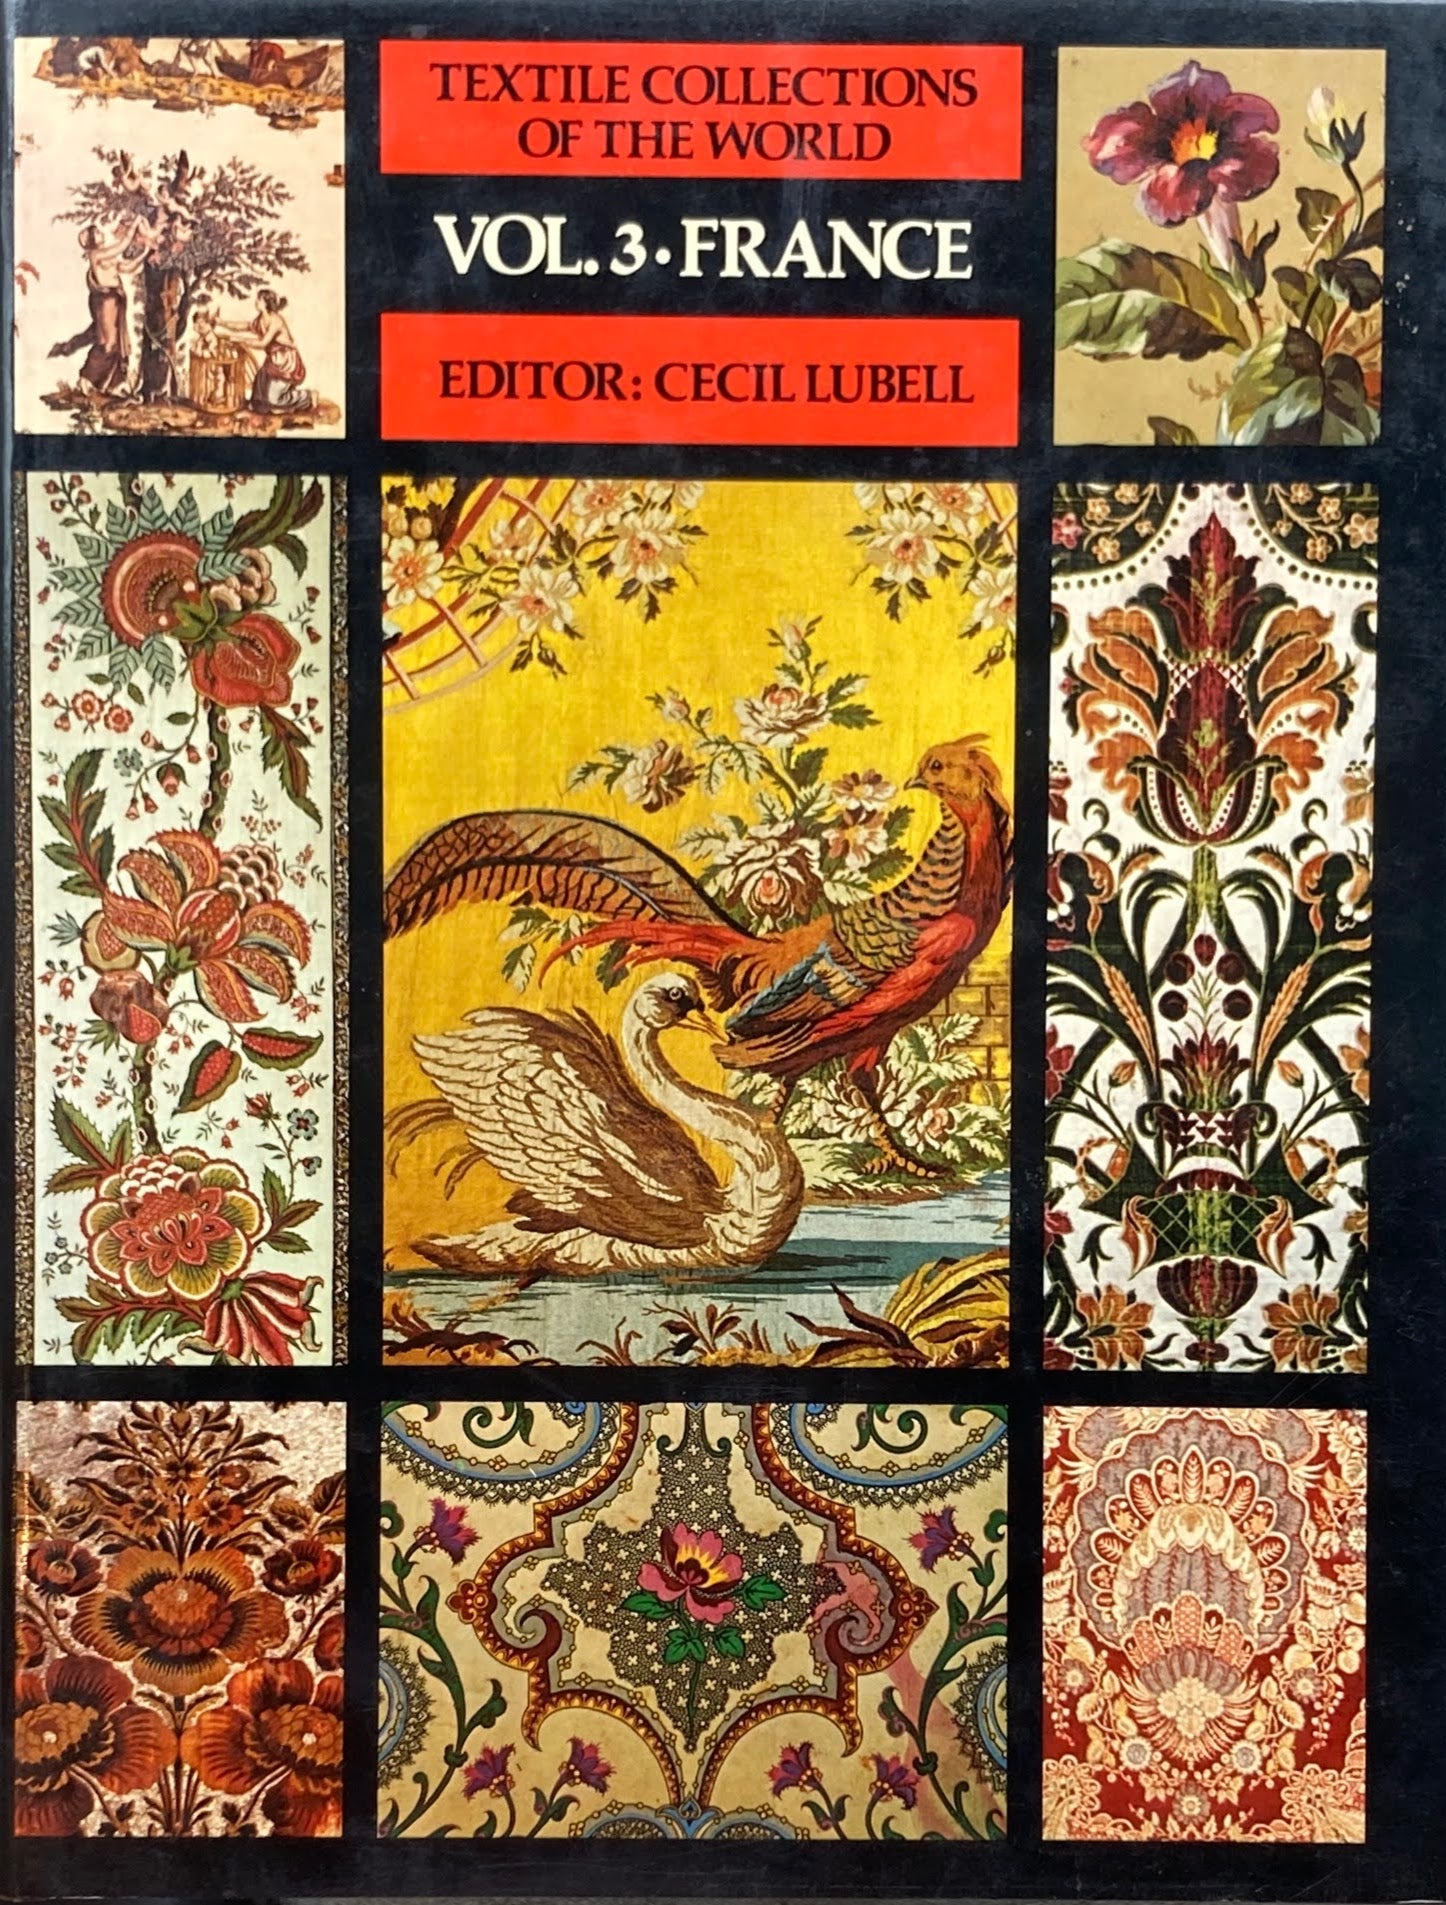 Textile collections of the world　vol.3 FRANCE　Cecil Lubell